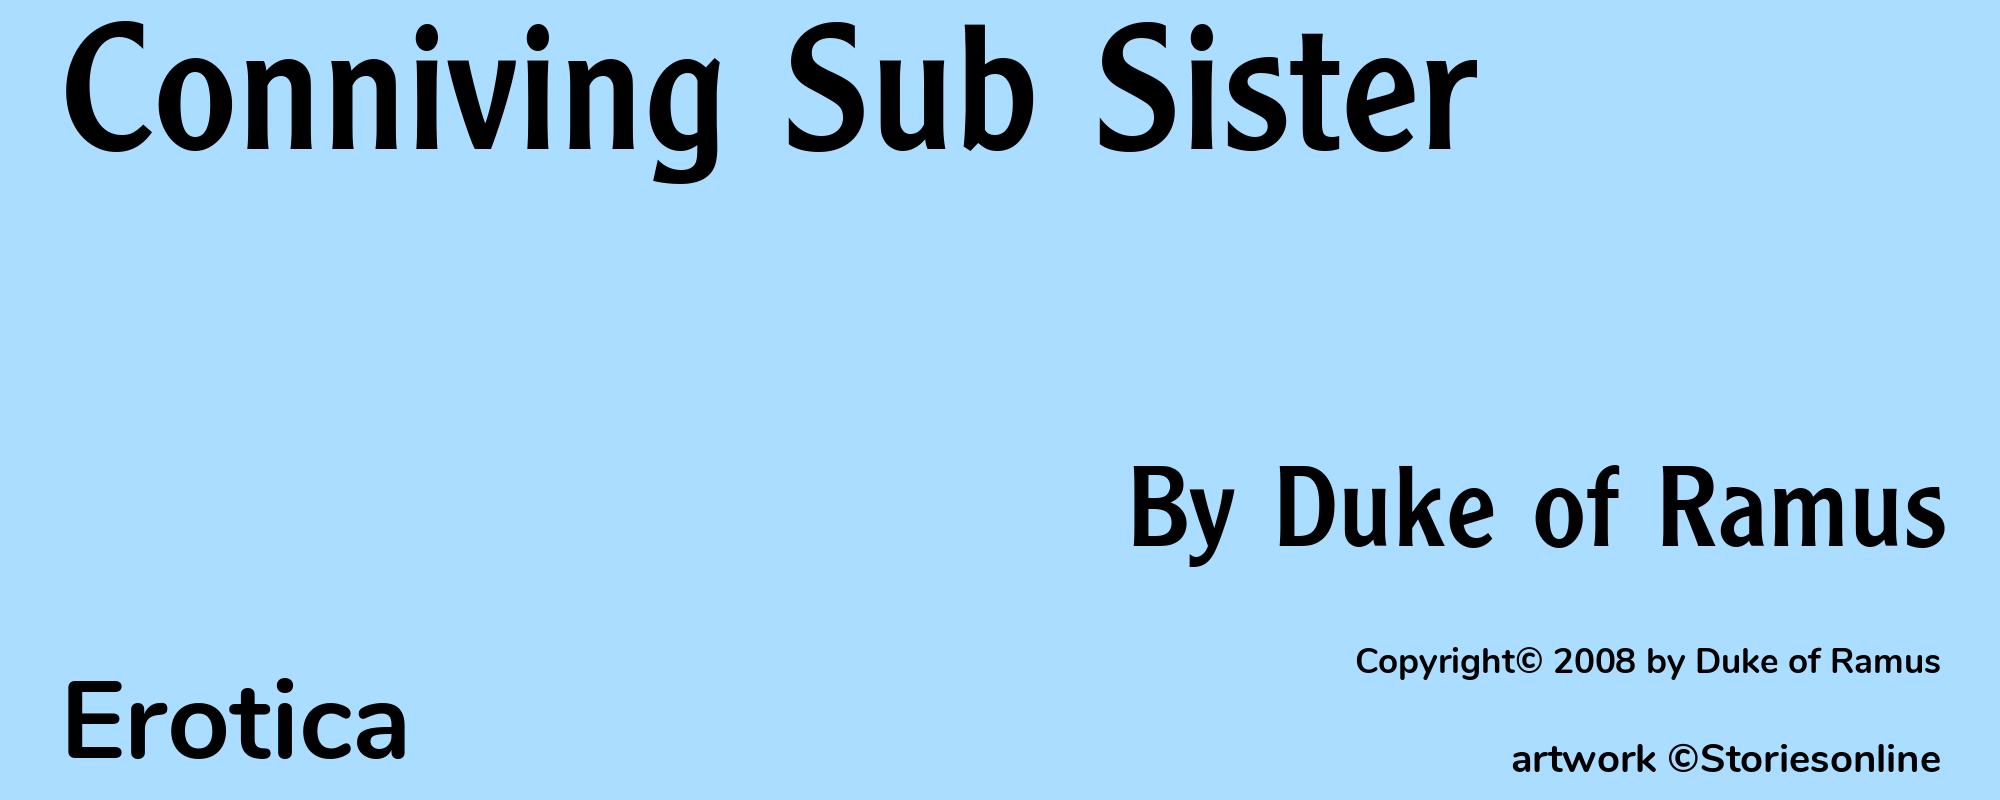 Conniving Sub Sister - Cover